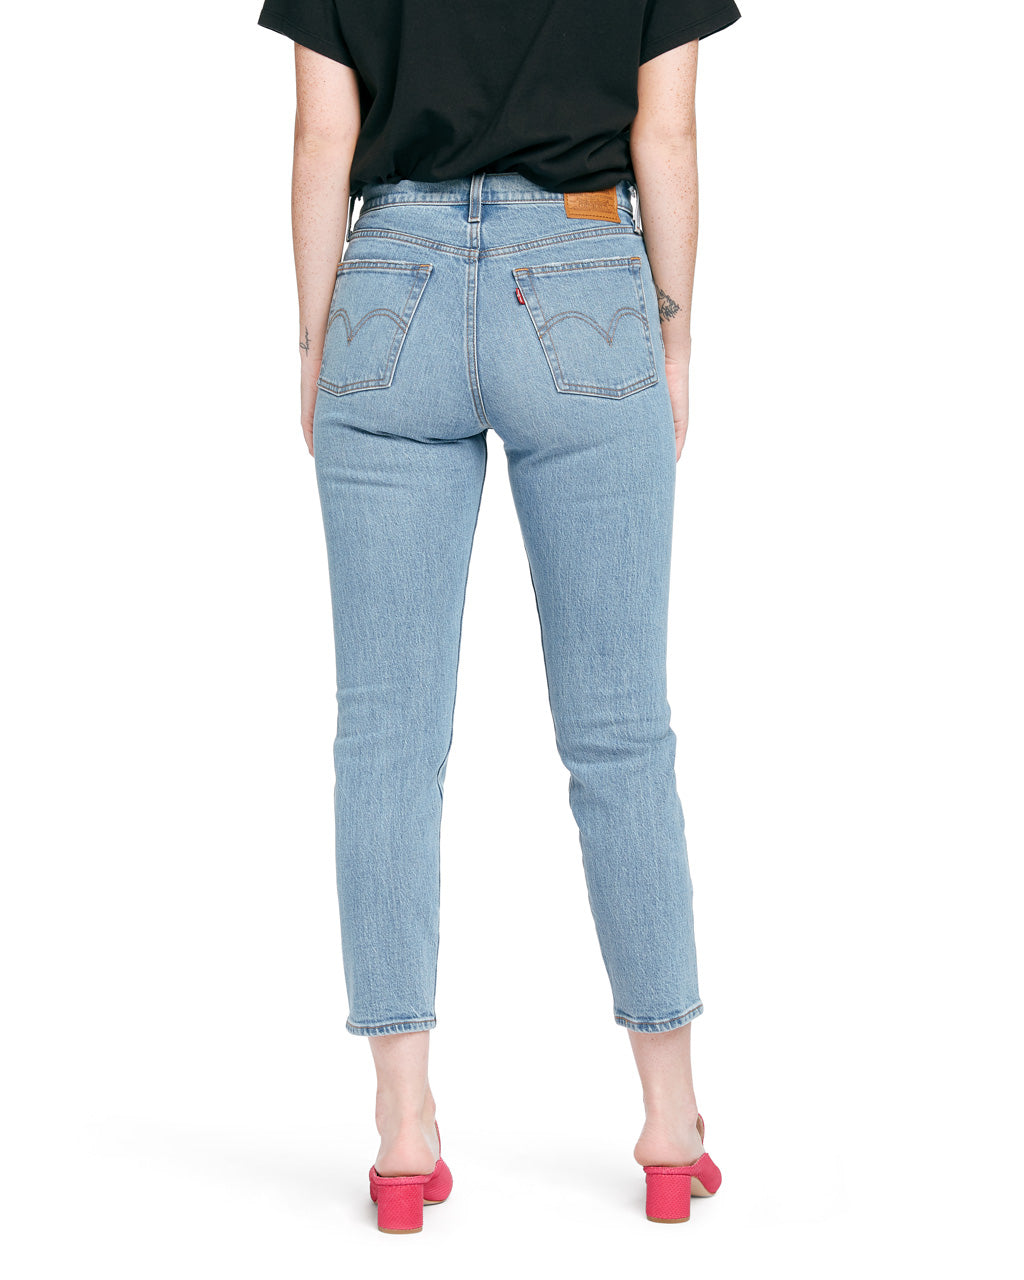 levi's women's wedgie icon jeans